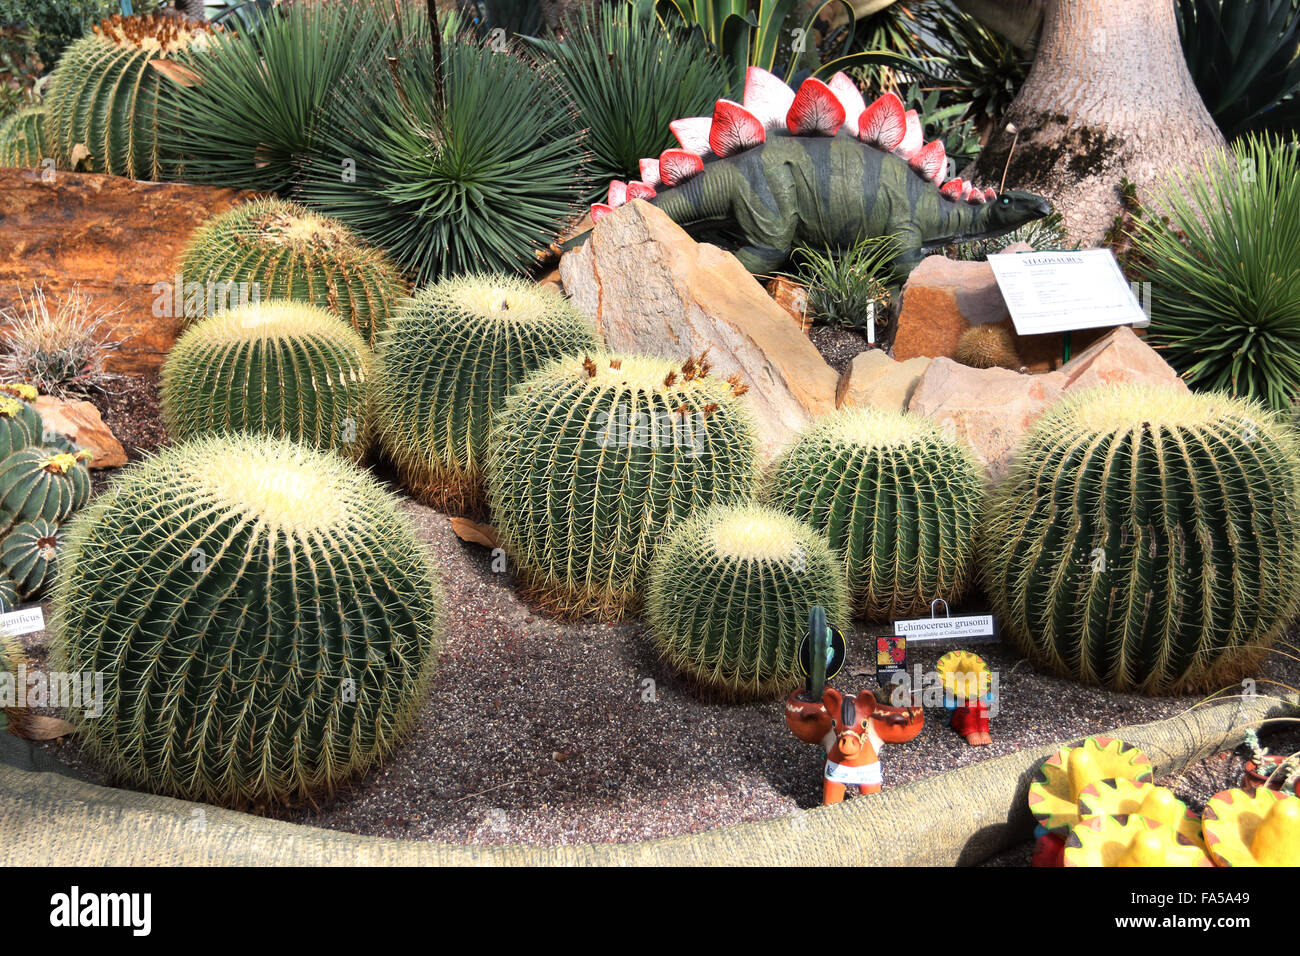 Barrel Cactus growing in greenhouse at local nursery Stock Photo